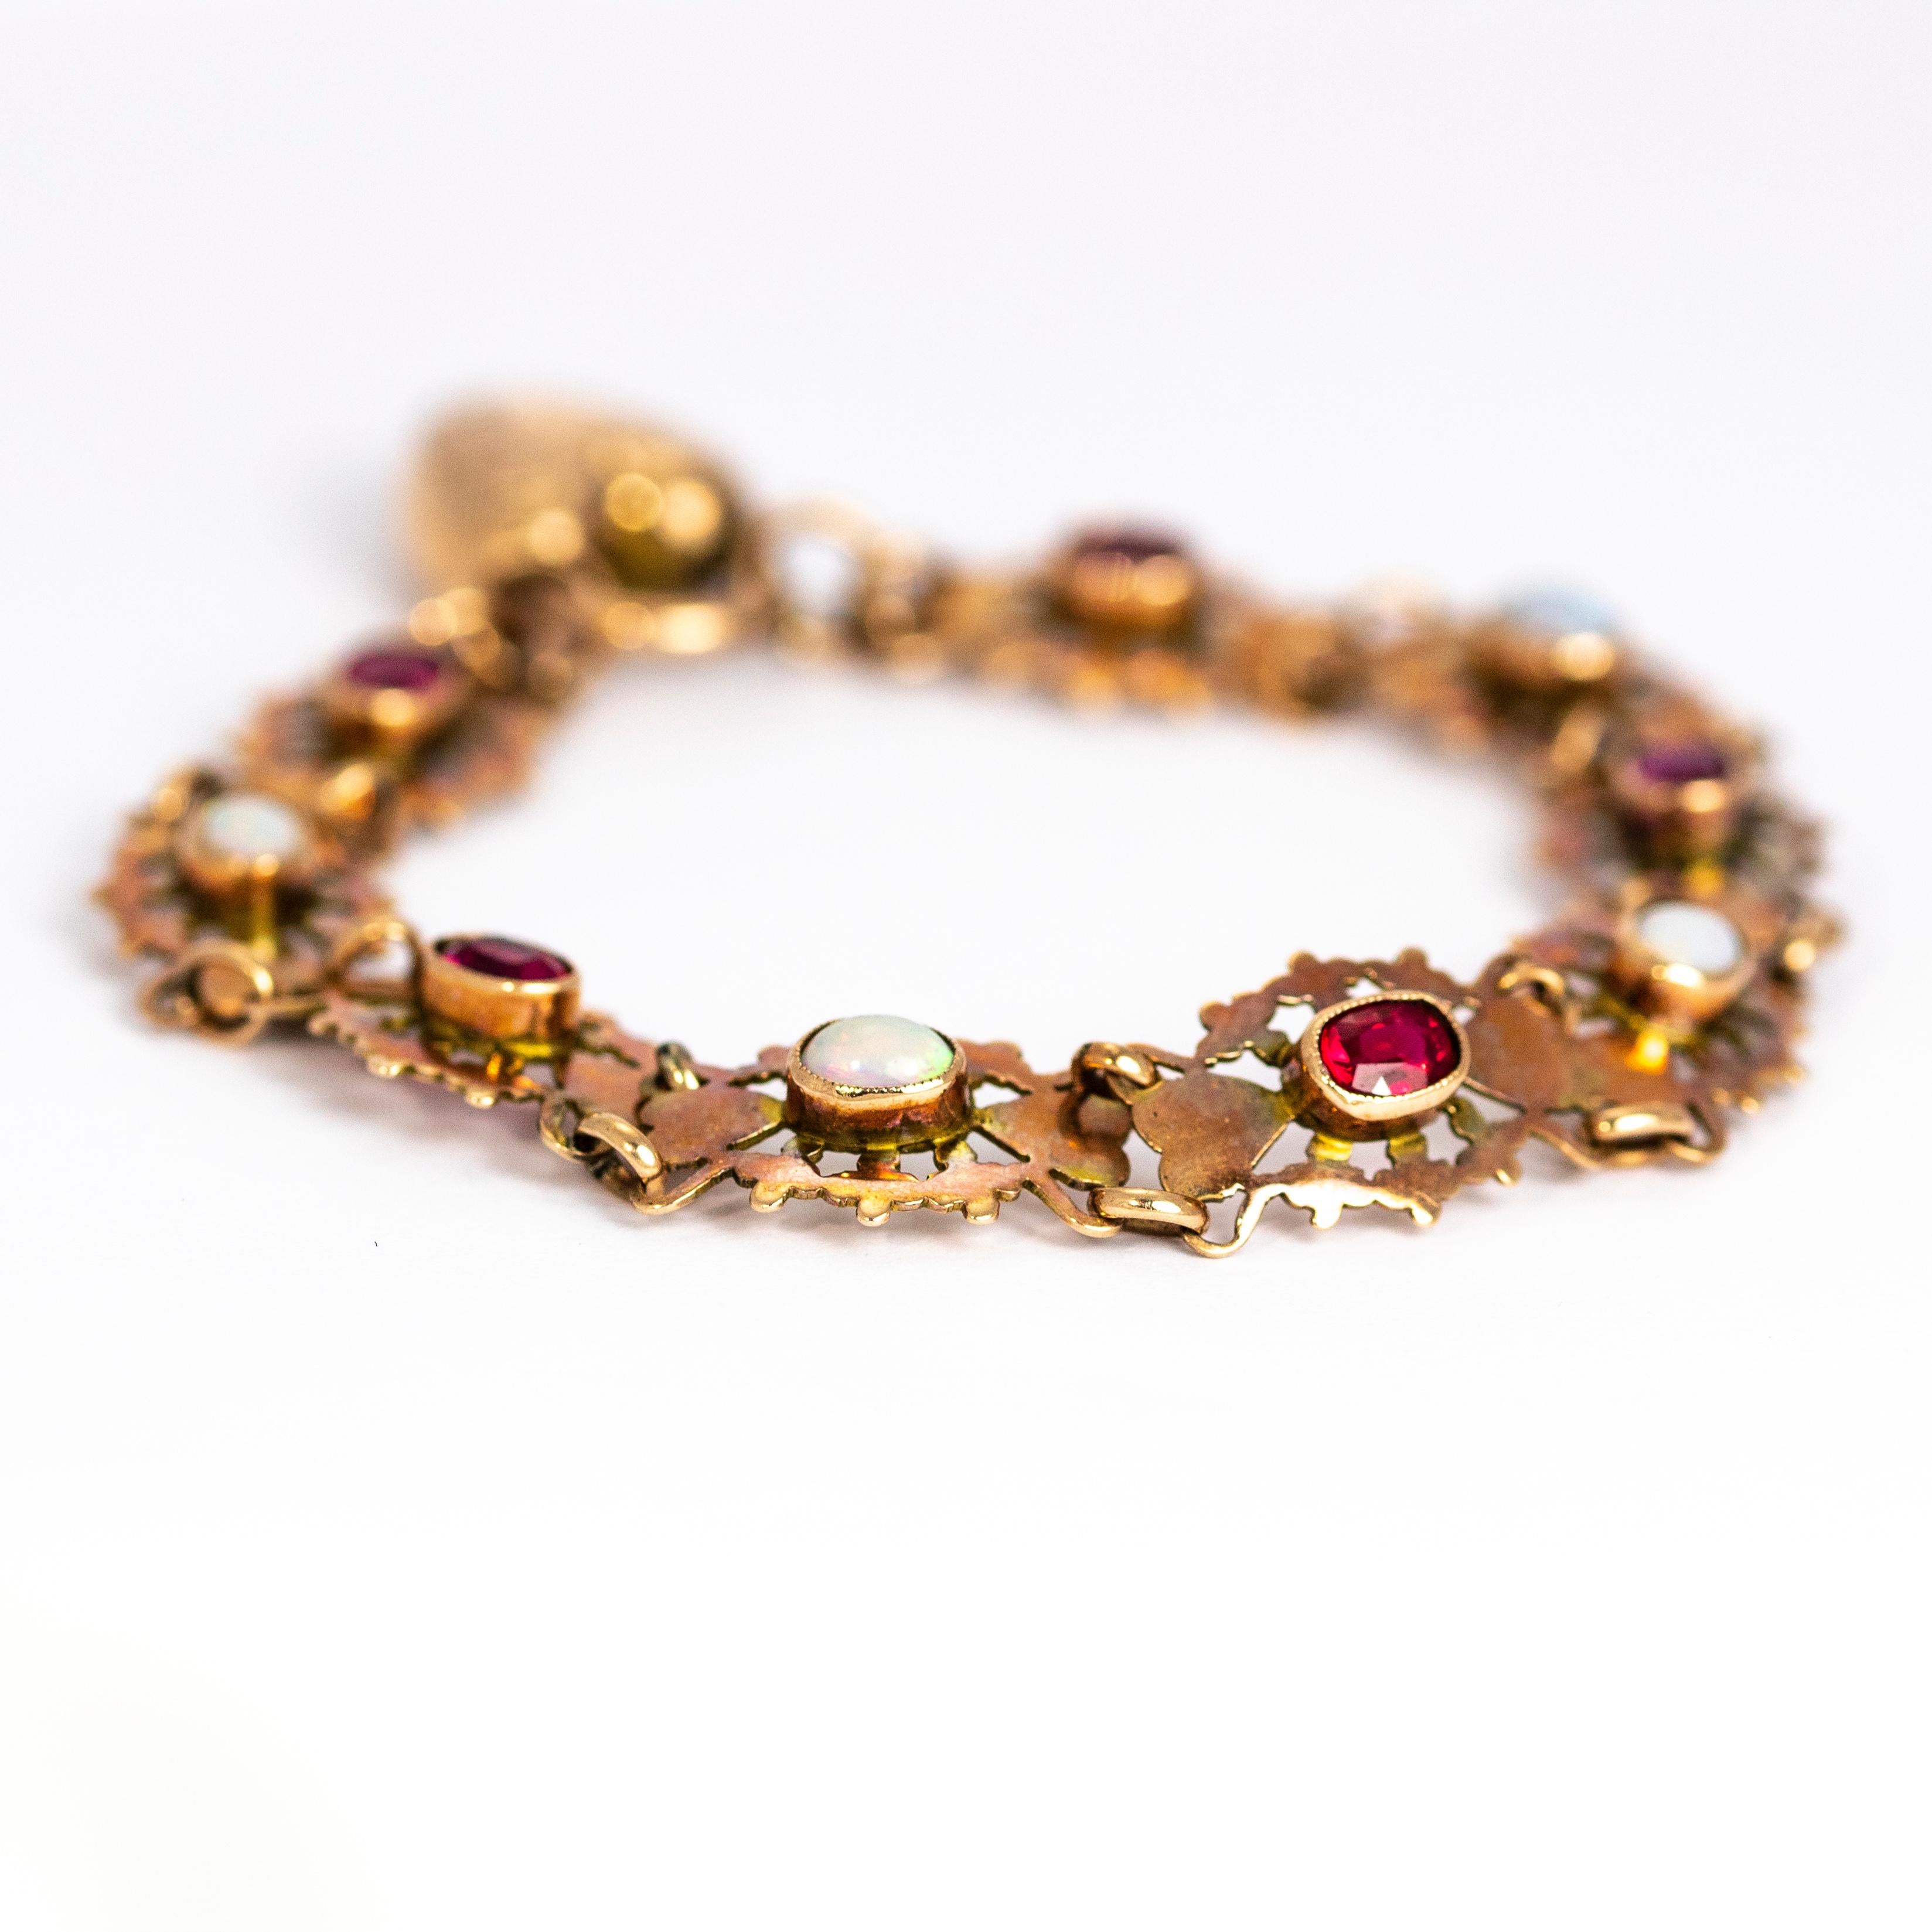 This elegant vintage bracelet is composed of nine ornate heart motif panels each set with alternating oval rubies and opal cabochons. Finishing with a ornate chunky heart padlock clasp. Modelled in 9 karat rose gold.

Length: 18.3 cm

Width: 1.2 cm